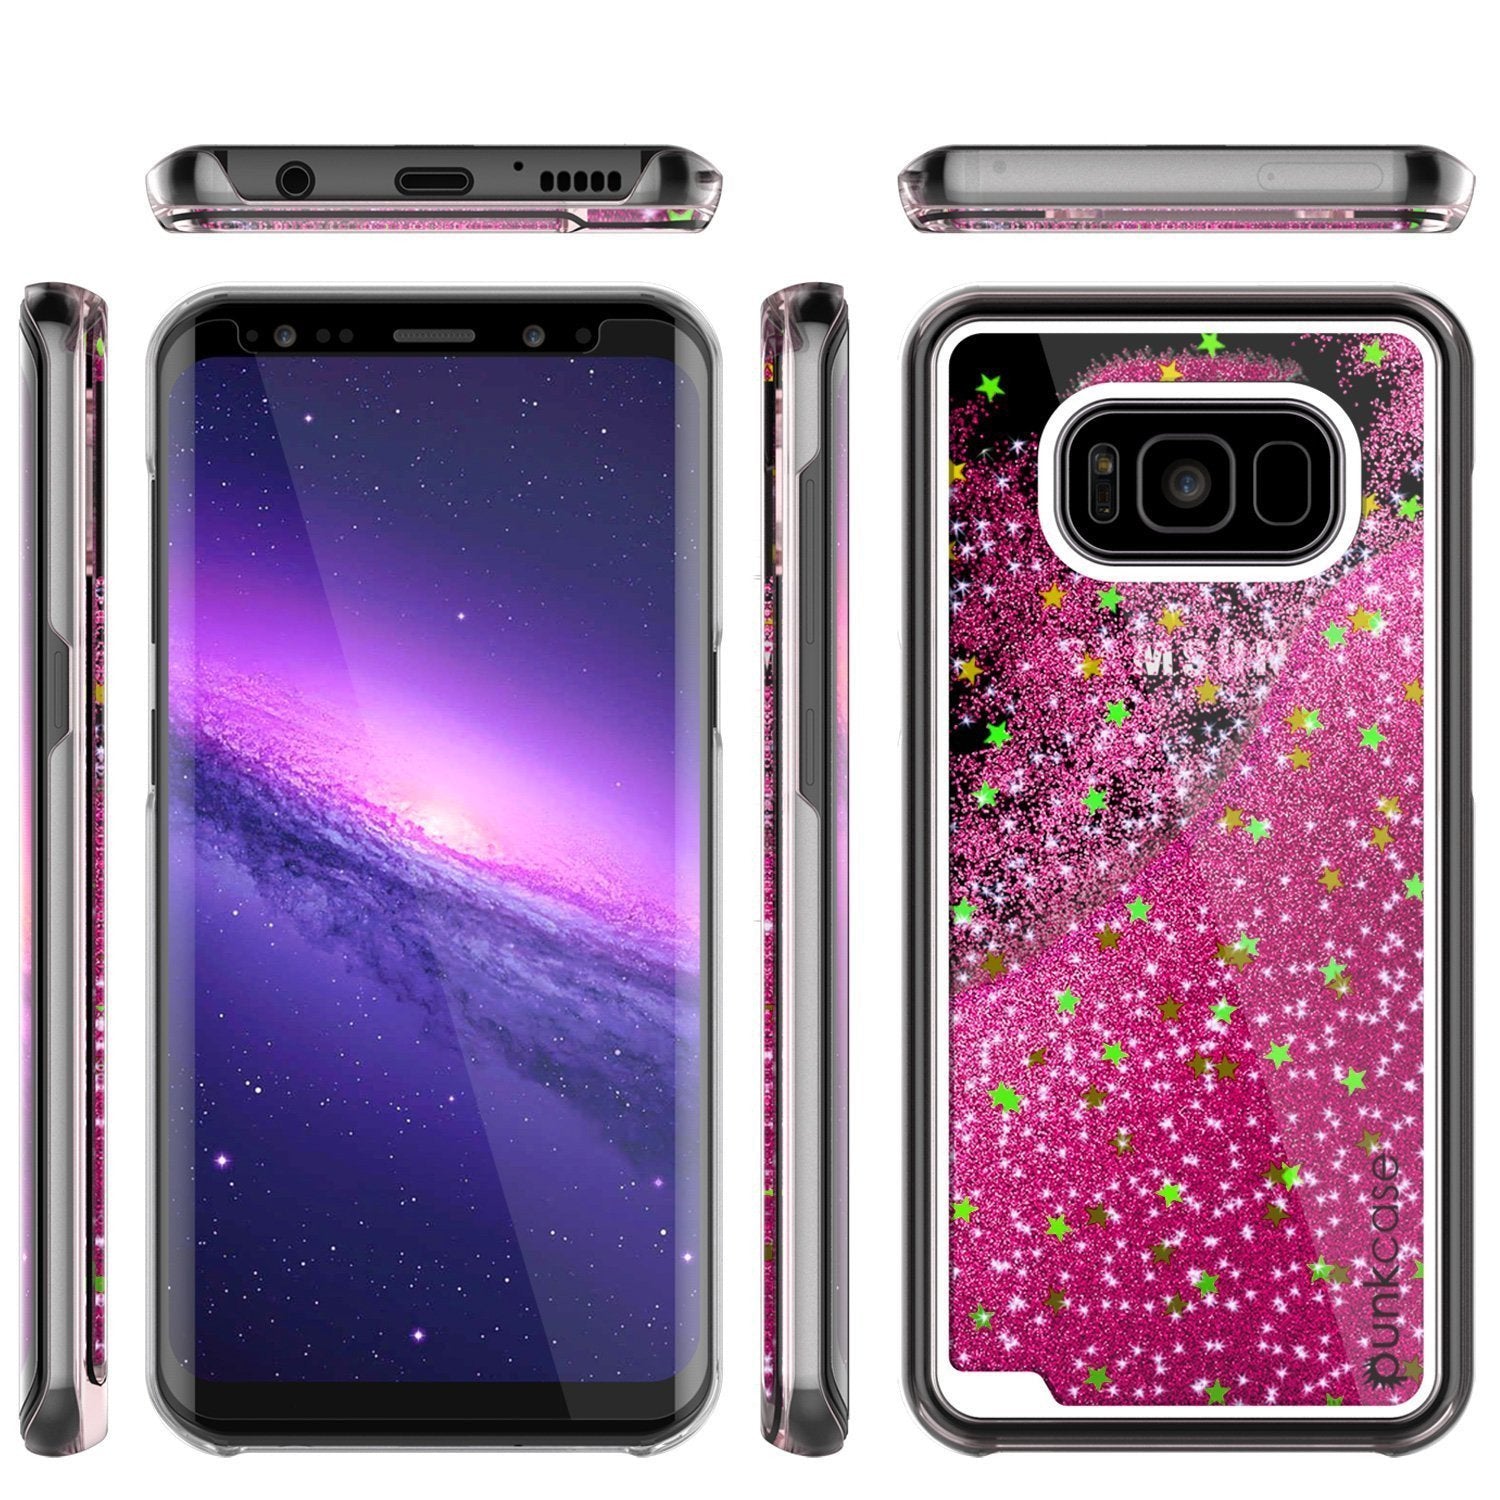 S8 Plus Case, Punkcase Liquid Pink Series Protective Dual Layer Cover